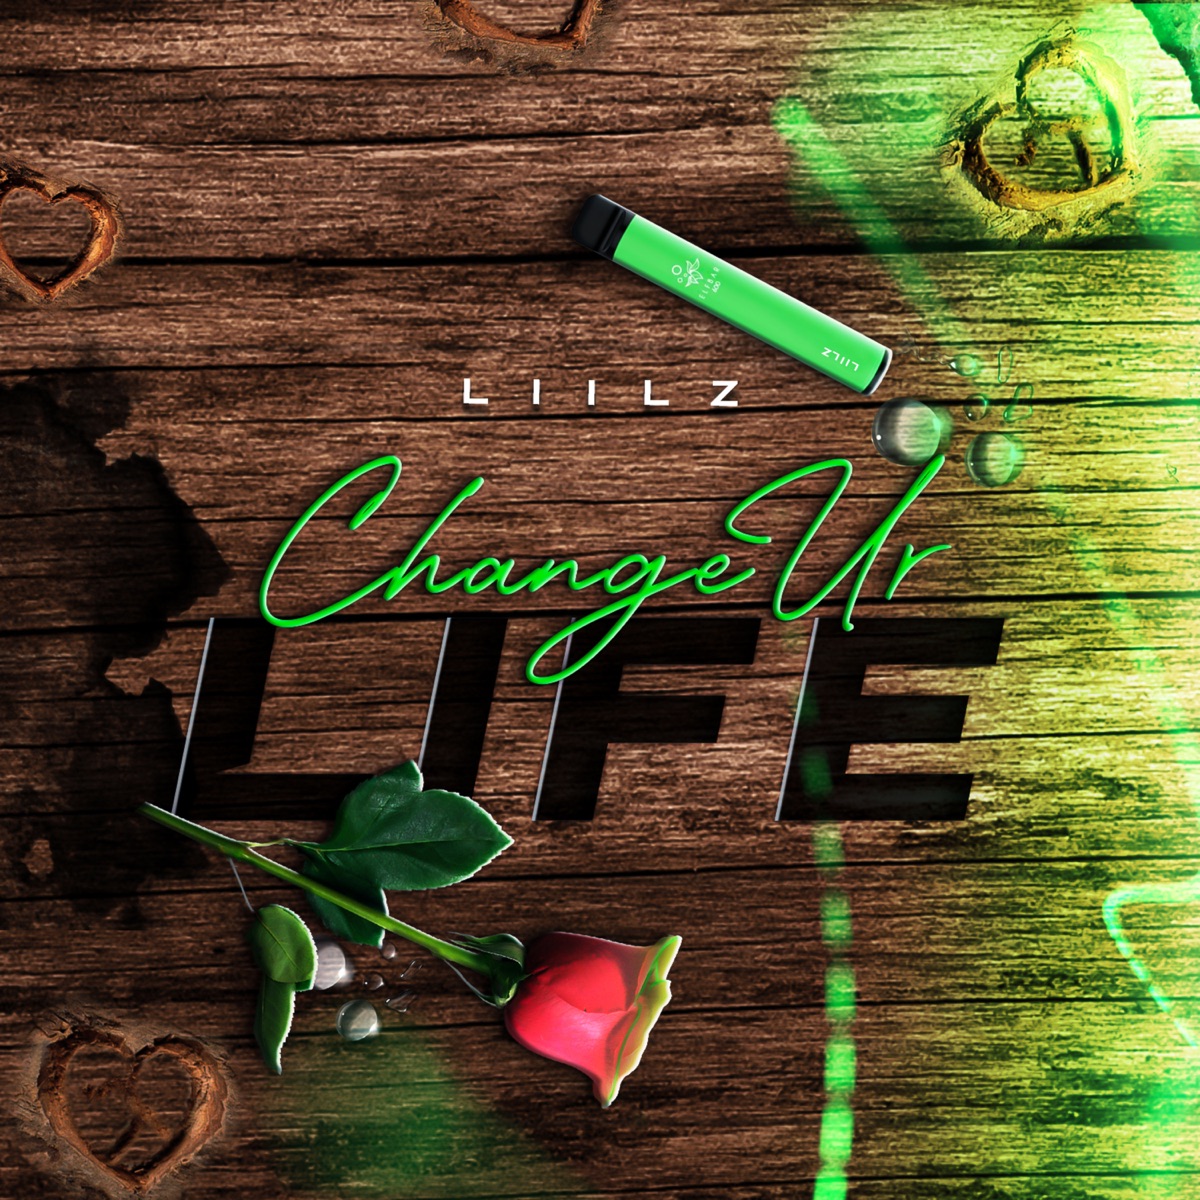 Glad U Came (feat. ZieZie) – Song by Liilz – Apple Music